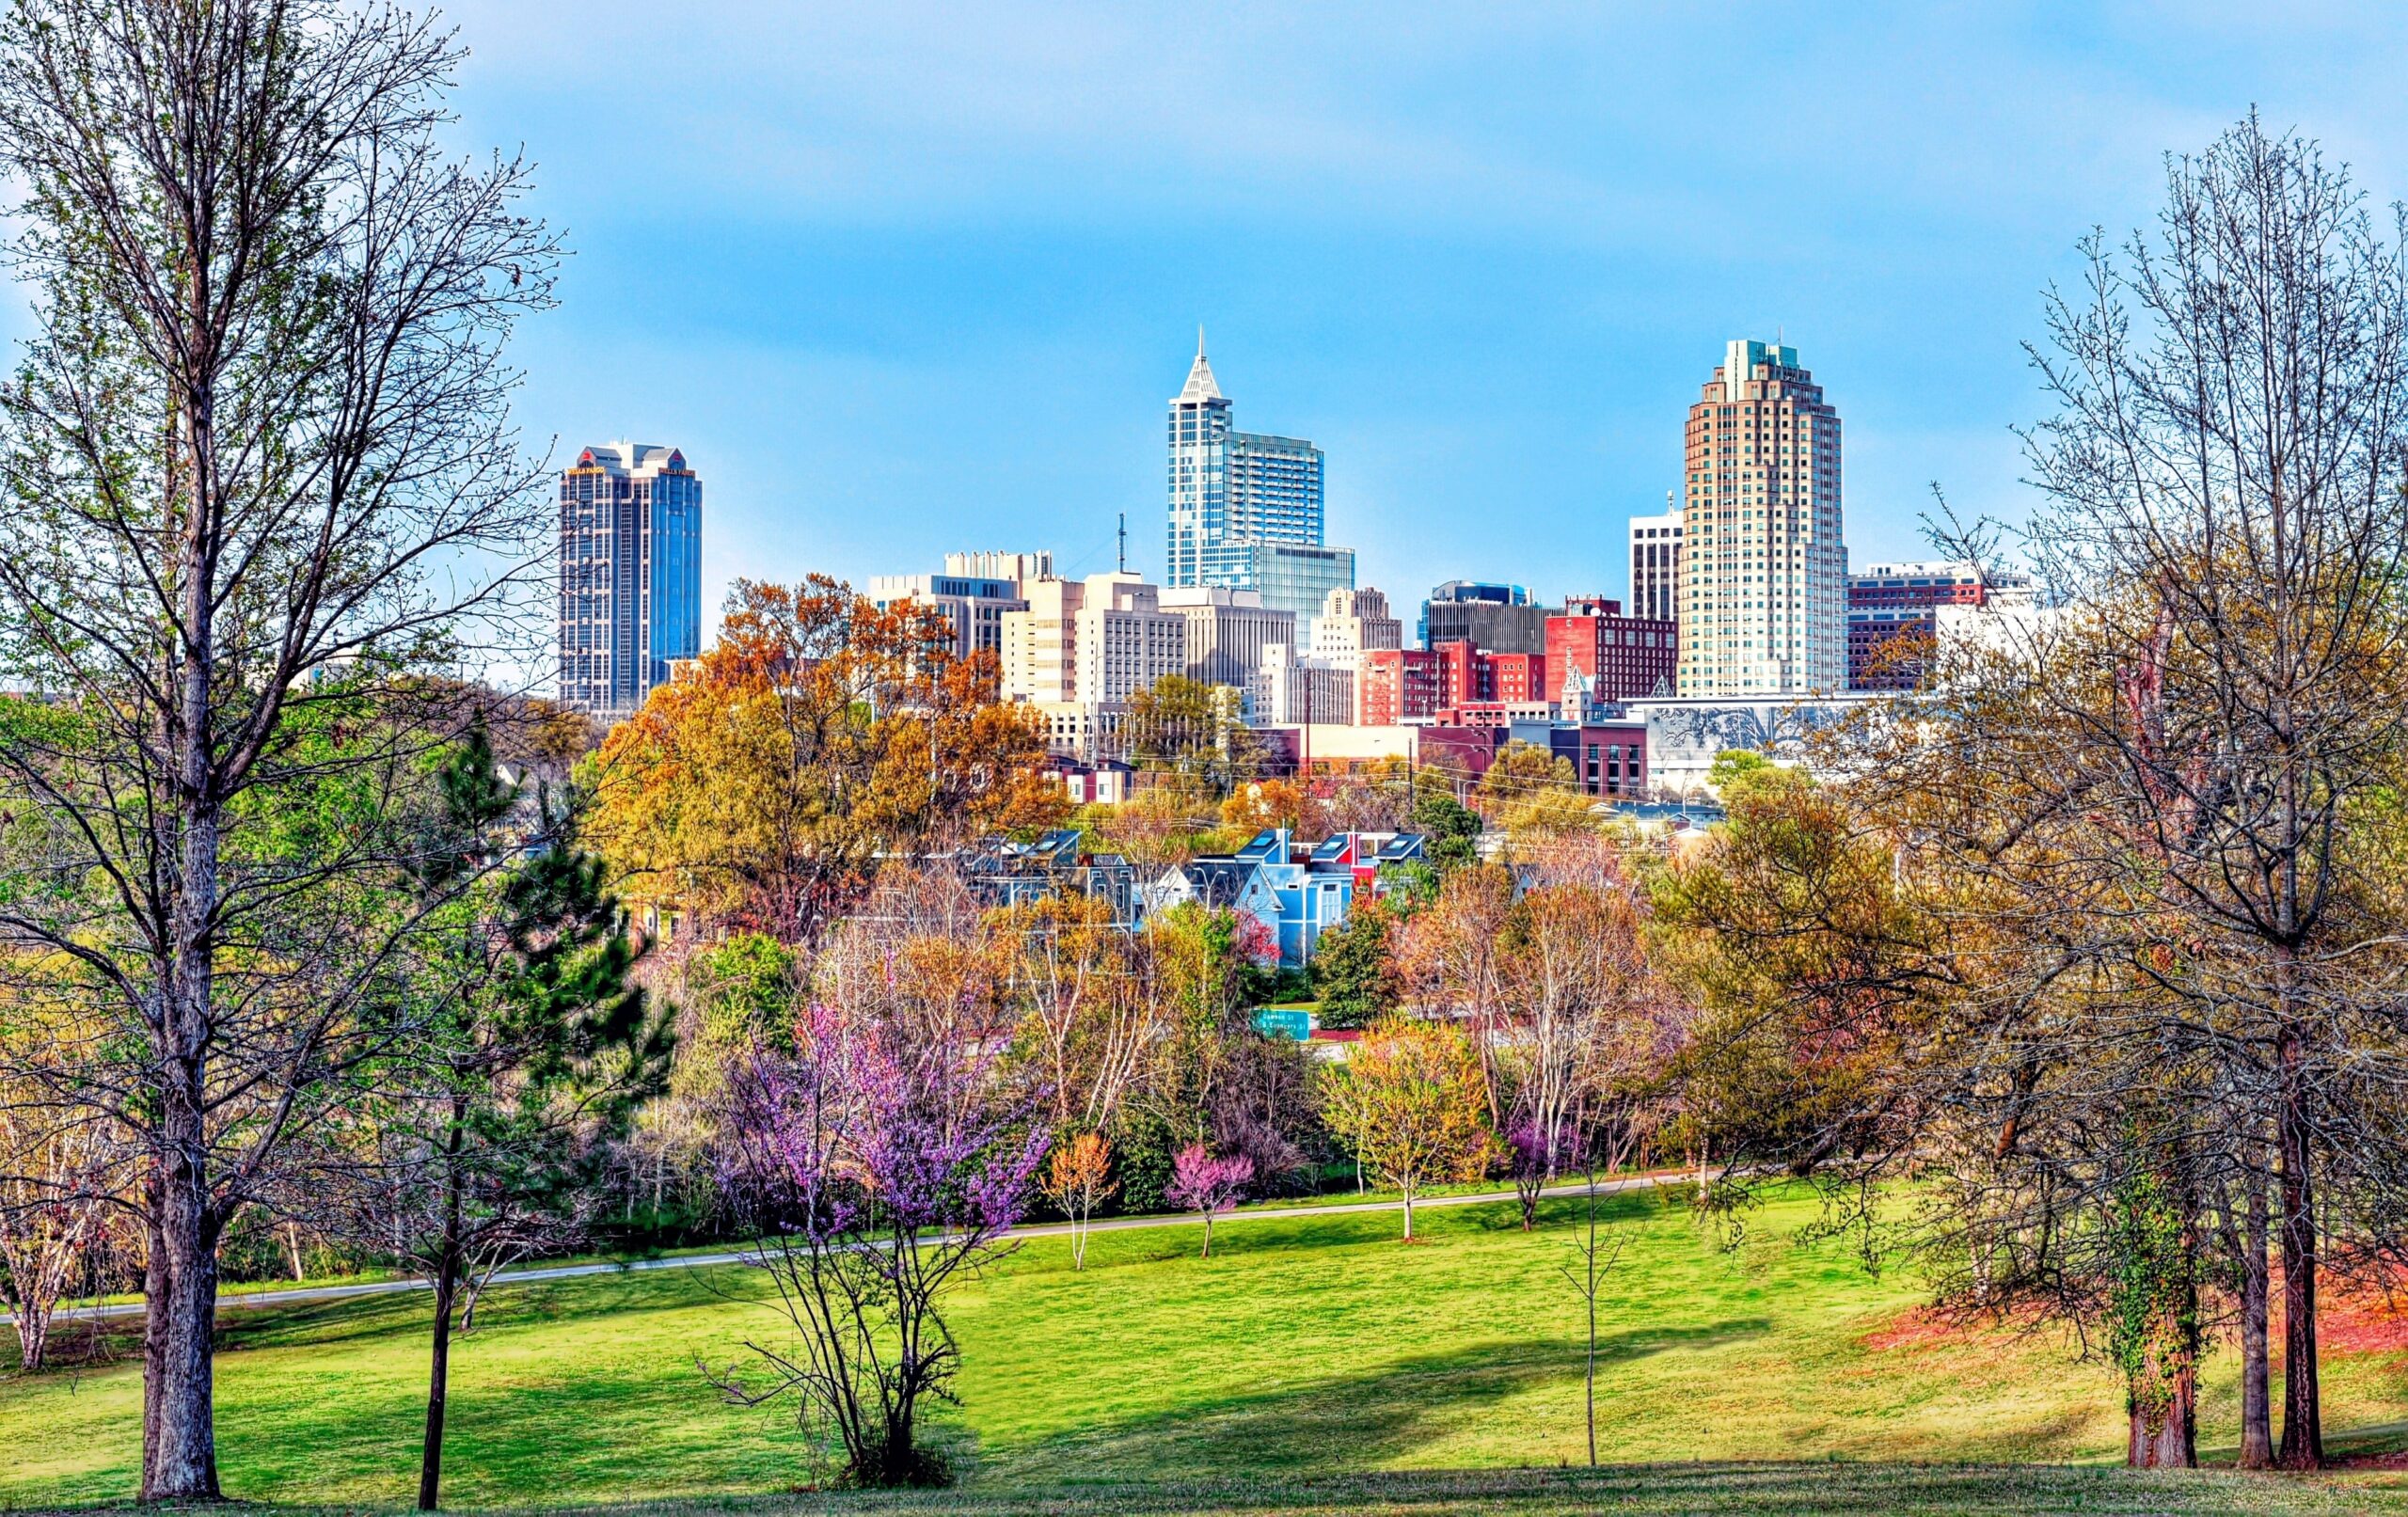 Colorful city skyline of downtown Raleigh, North Carolina.